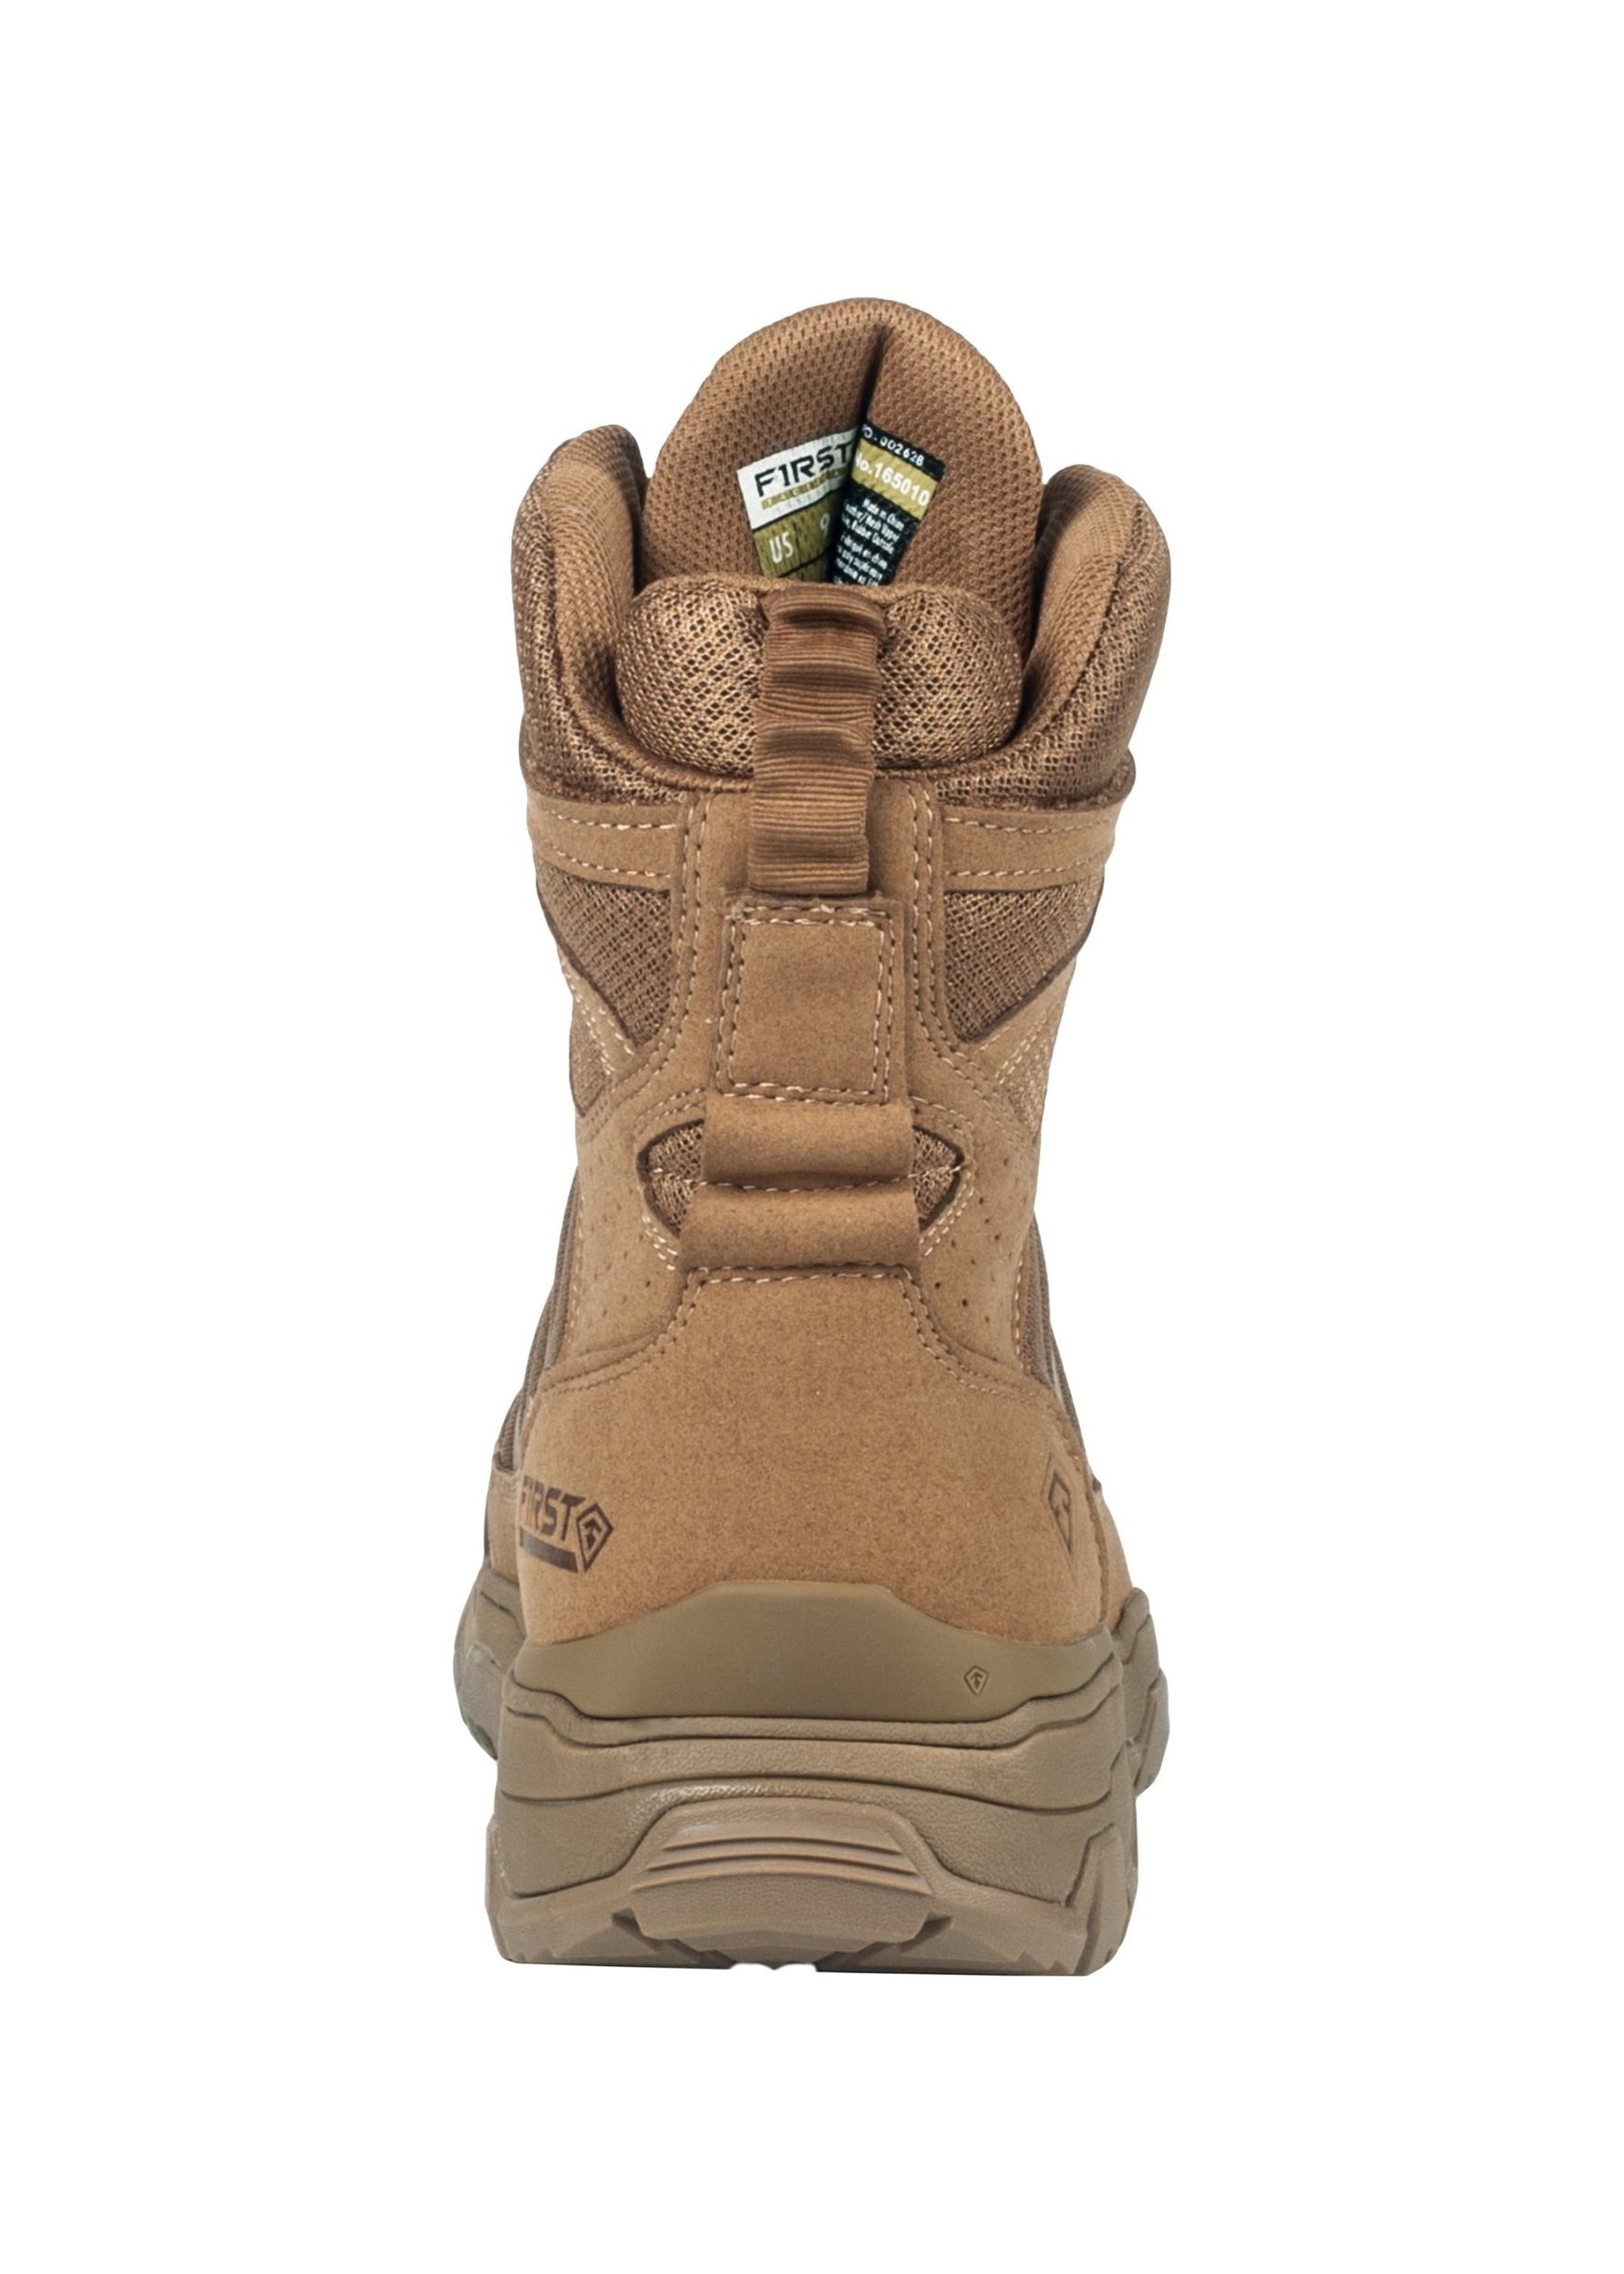 First Tactical First Tactical Men's 7" Operator Boot